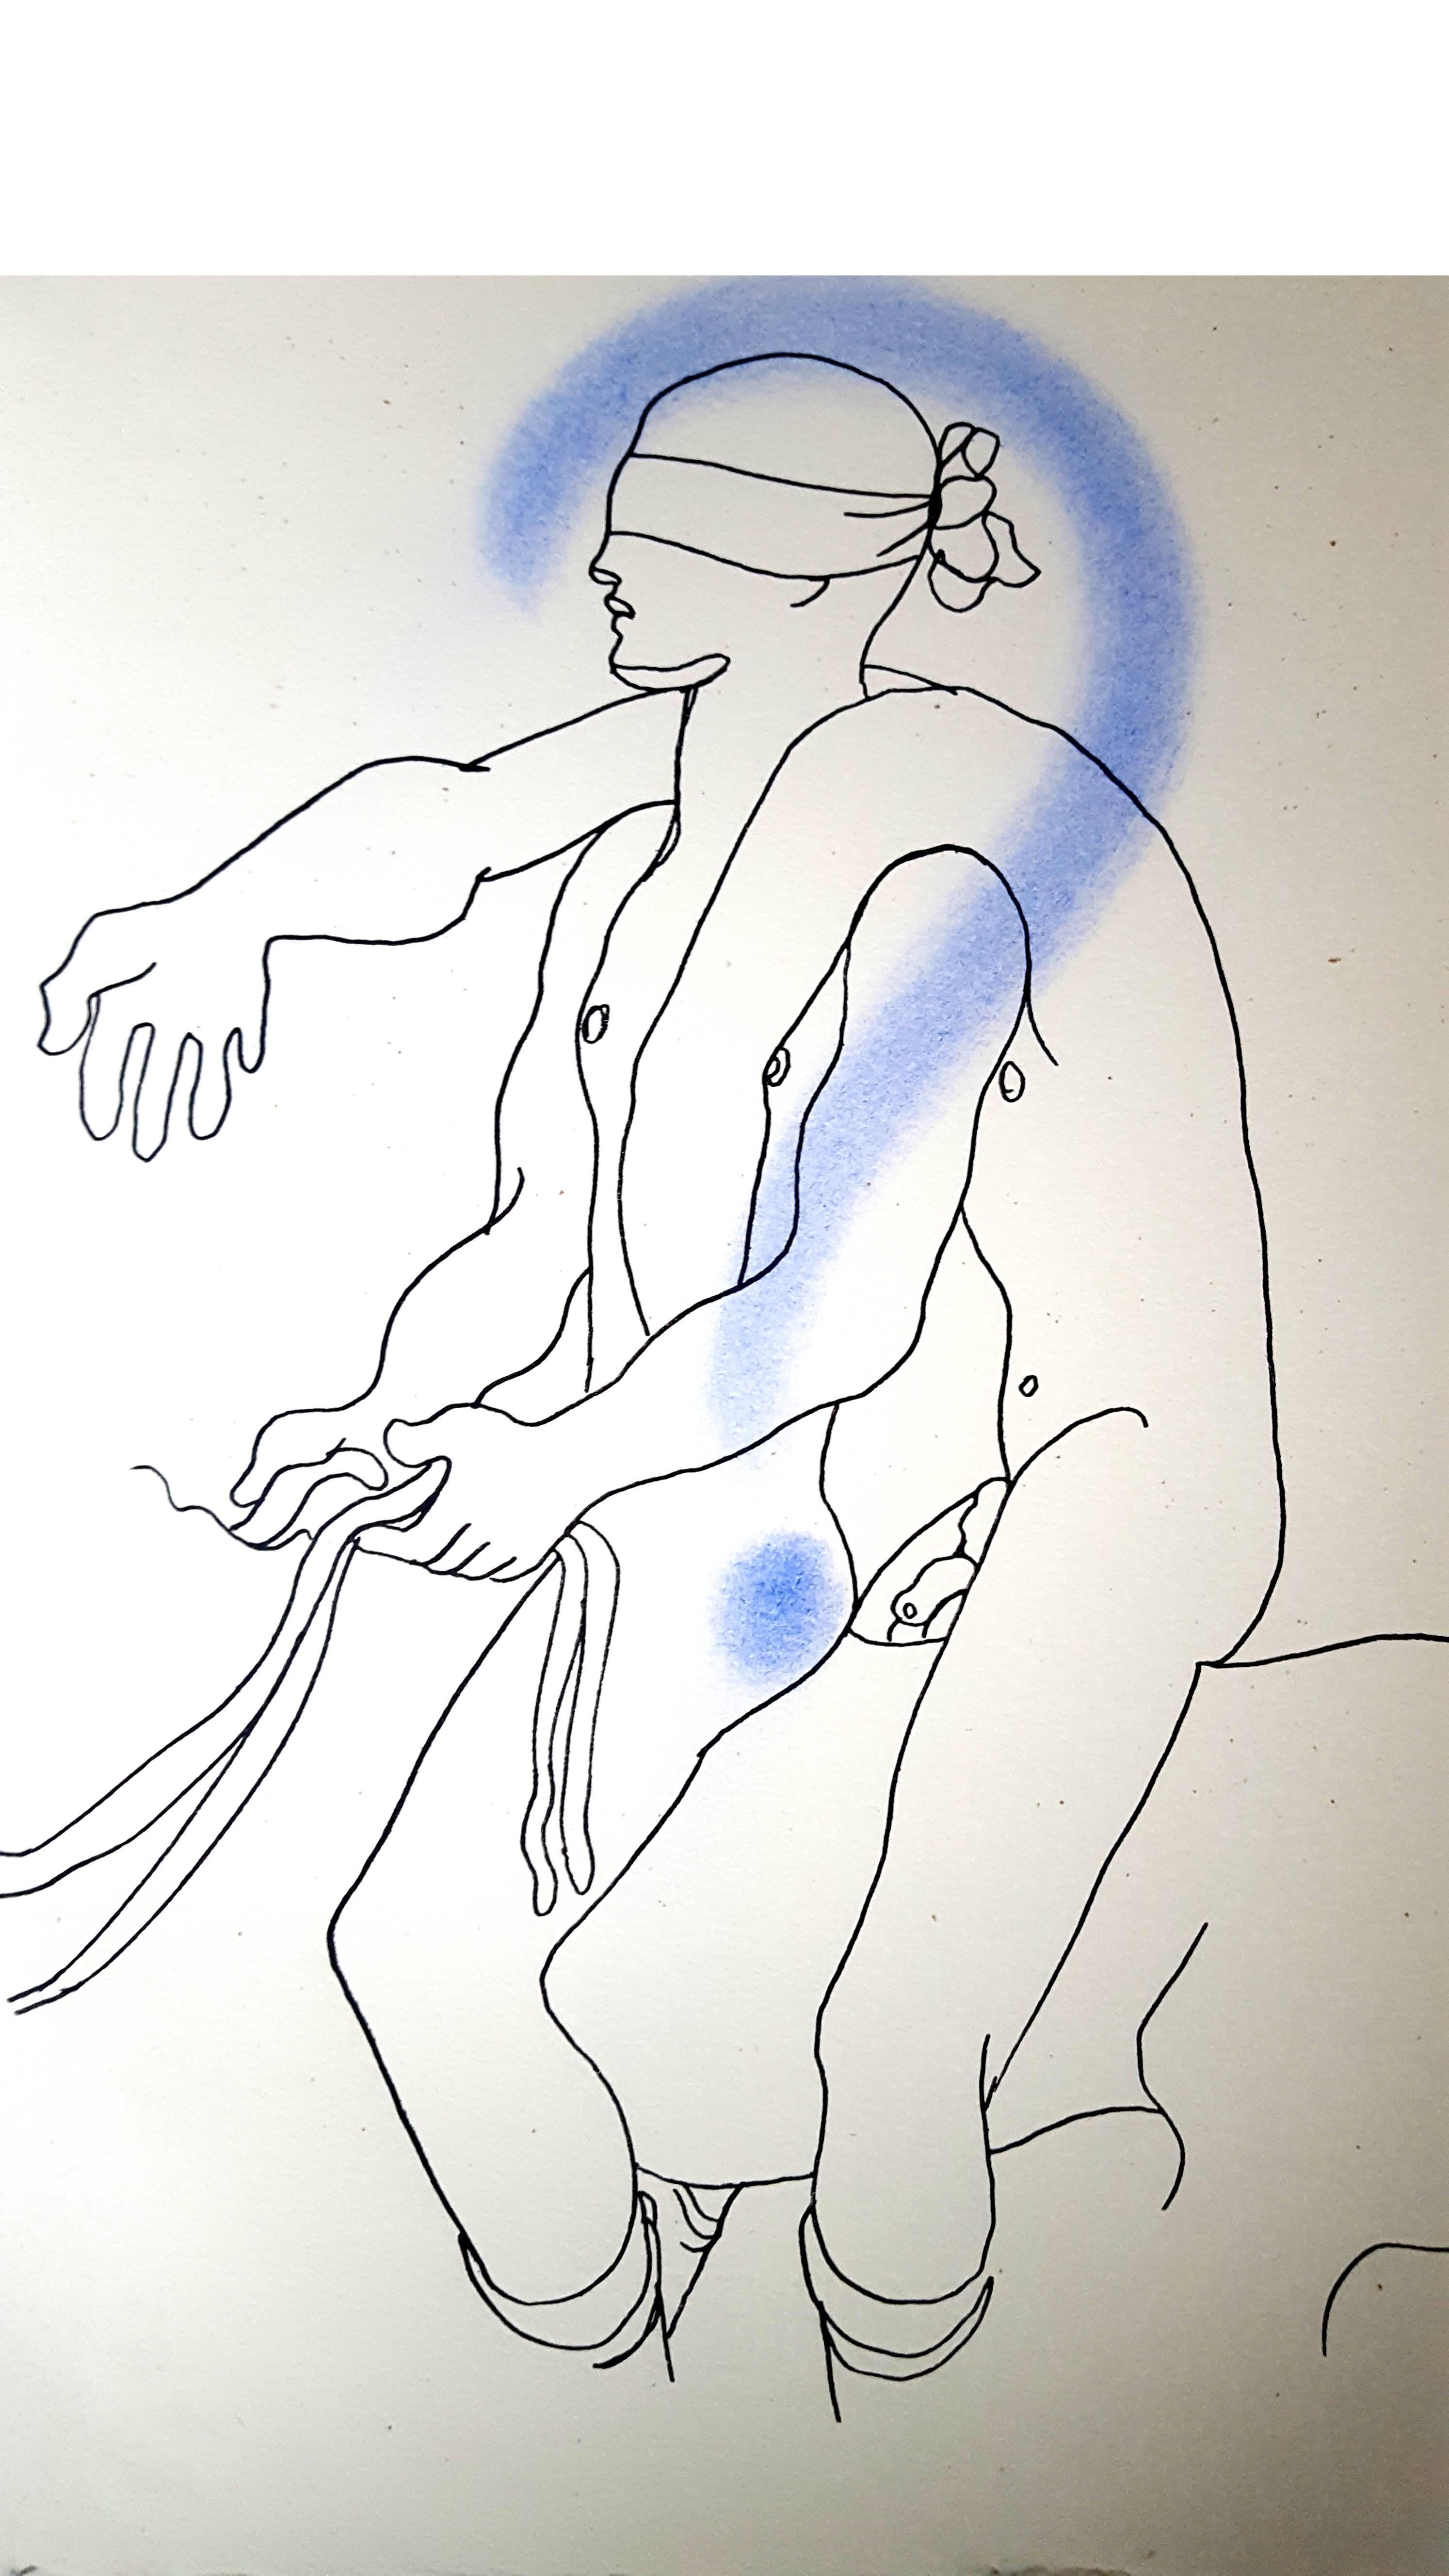 Jean Cocteau
White Book - Autobiography about Cocteau's discovery of his homosexuality. The book was first published anonymously and created a scandal.
Original Handcolored Lithograph
Dimensions: 28.4 x 22.8 cm
Edition of 380 on Vélin d’Arche
Paris,